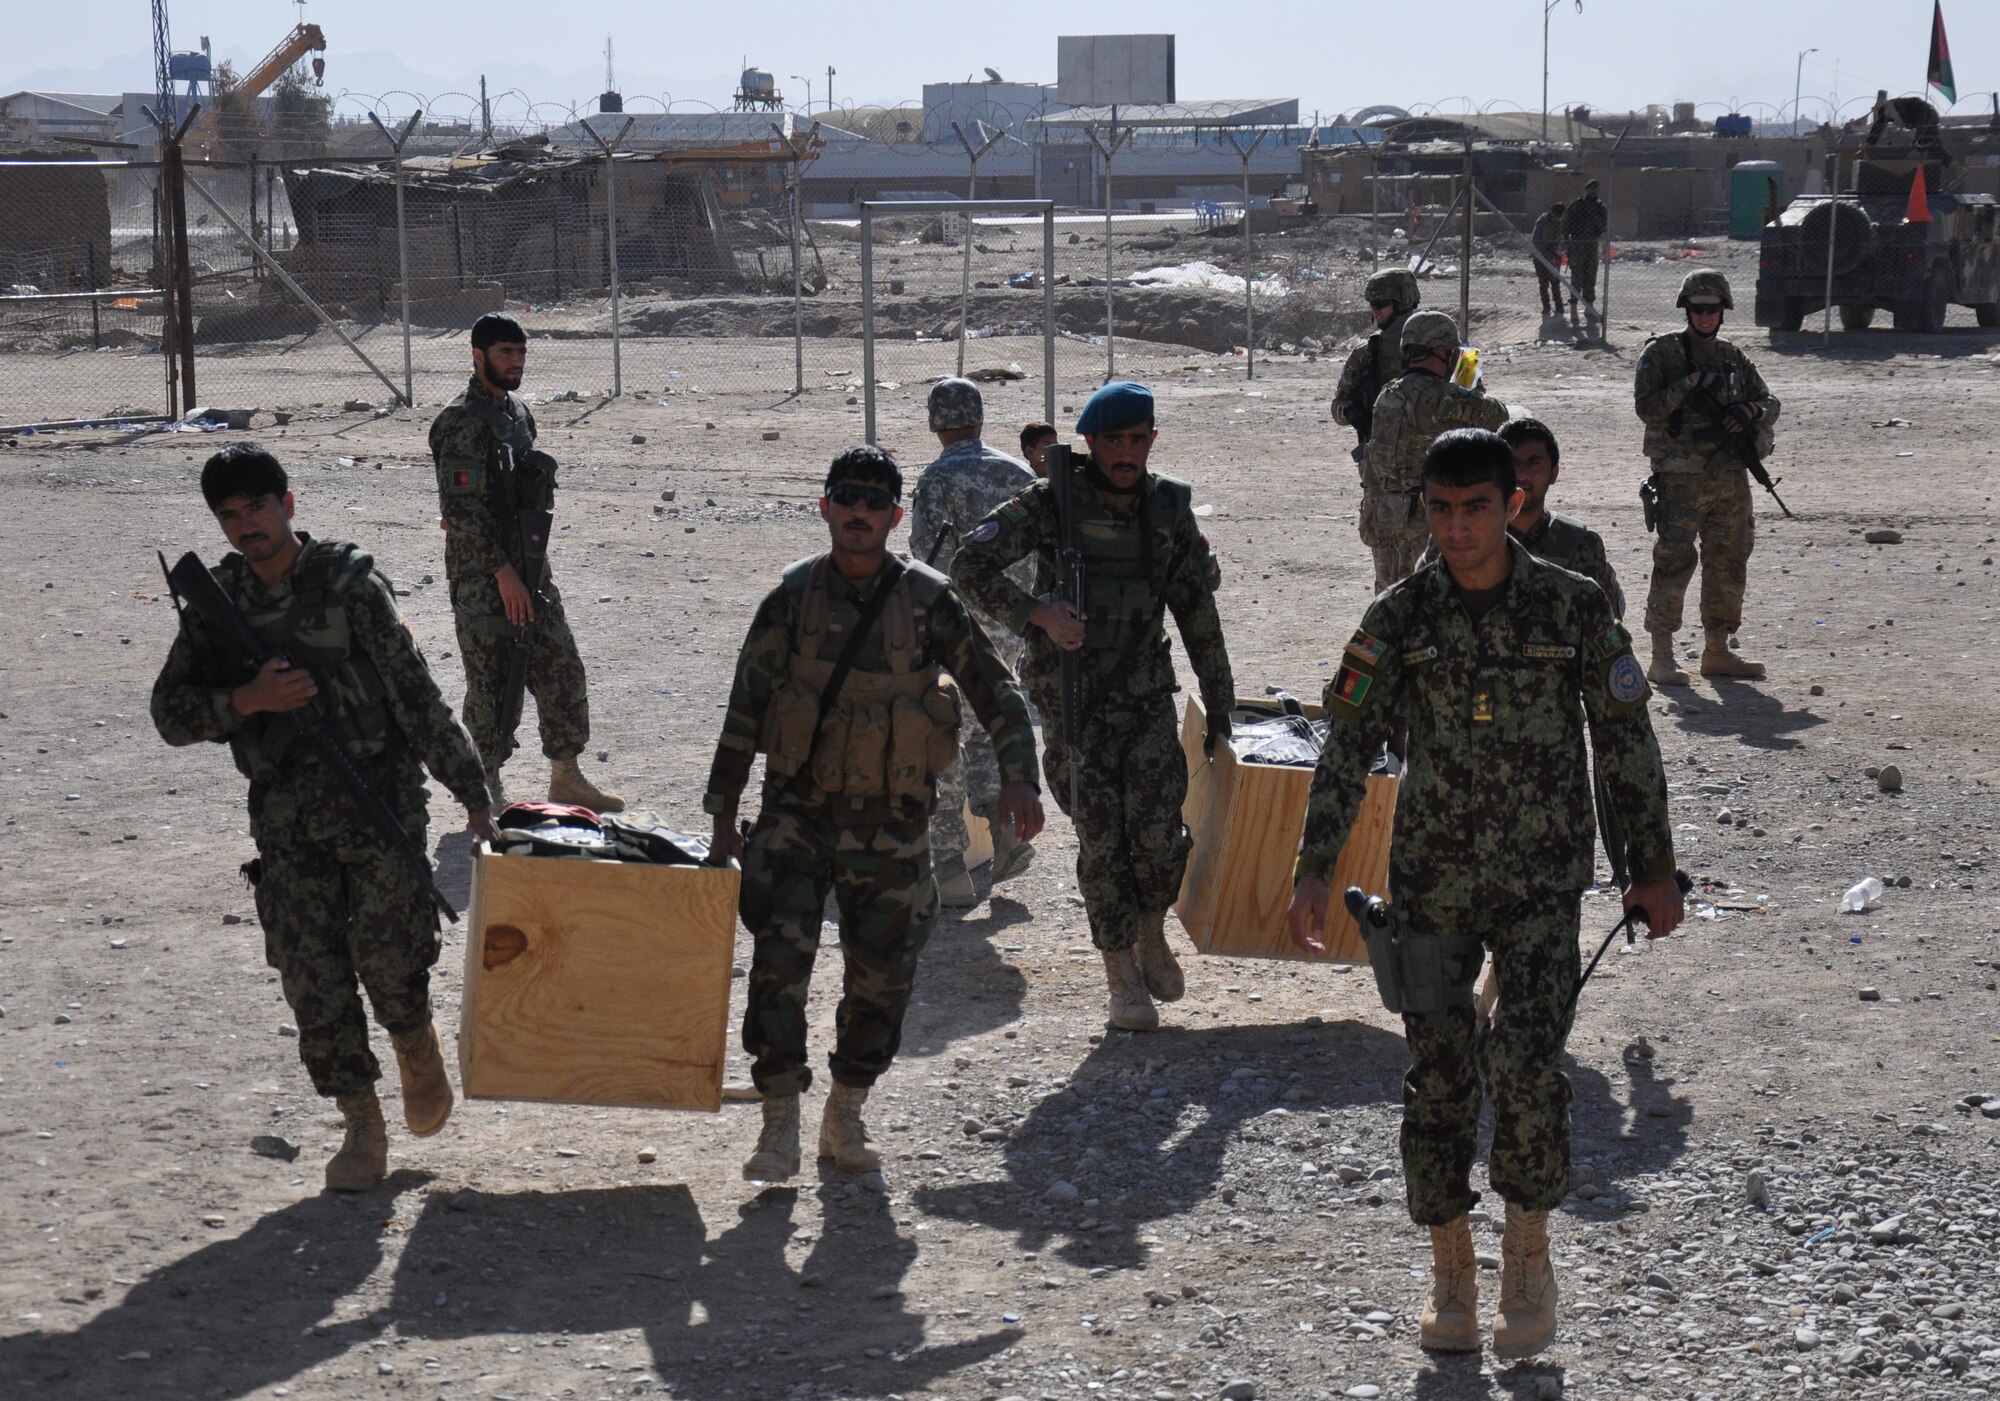 Afghan Air Force security forces airmen with the Kandahar Air Wing carry school supplies to a school near Kandahar Airfield on Jan. 24. The mission was led by the Afghans and carried out with logistical and security support from Coalition forces. (U.S. Air Force photo/Capt. Tristan Hinderliter)